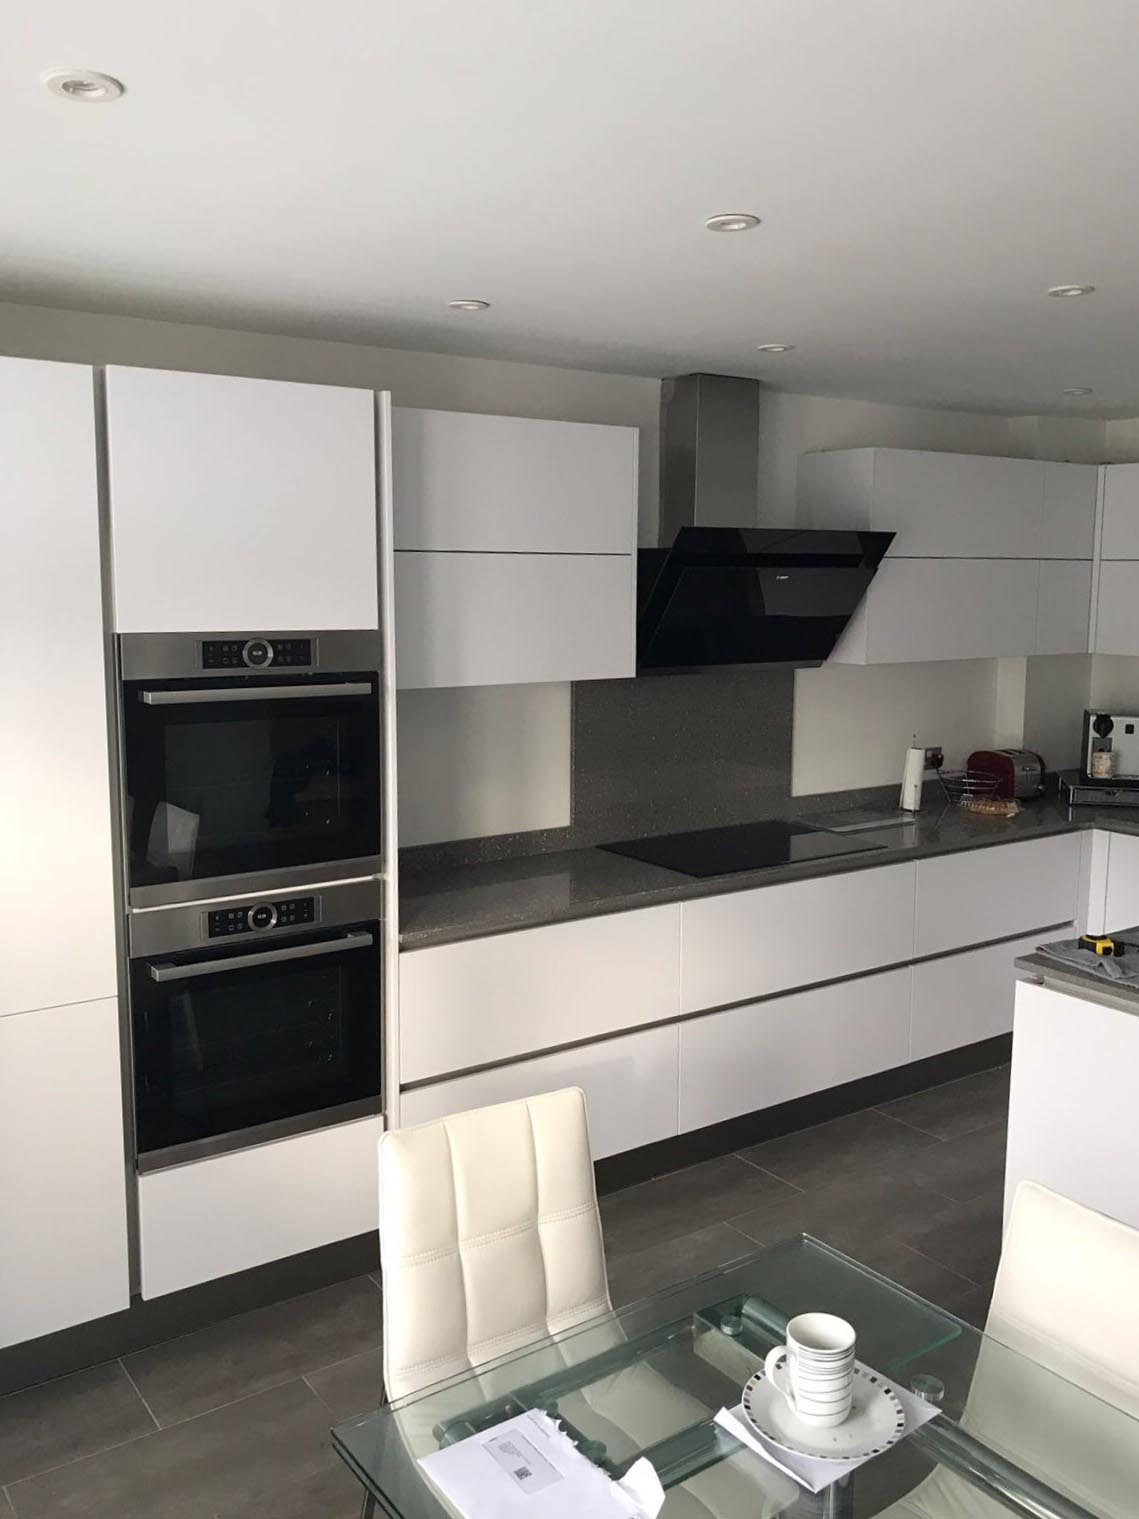 German kitchen designed, supplied and installed by Hampdens KB in Borehamwood.